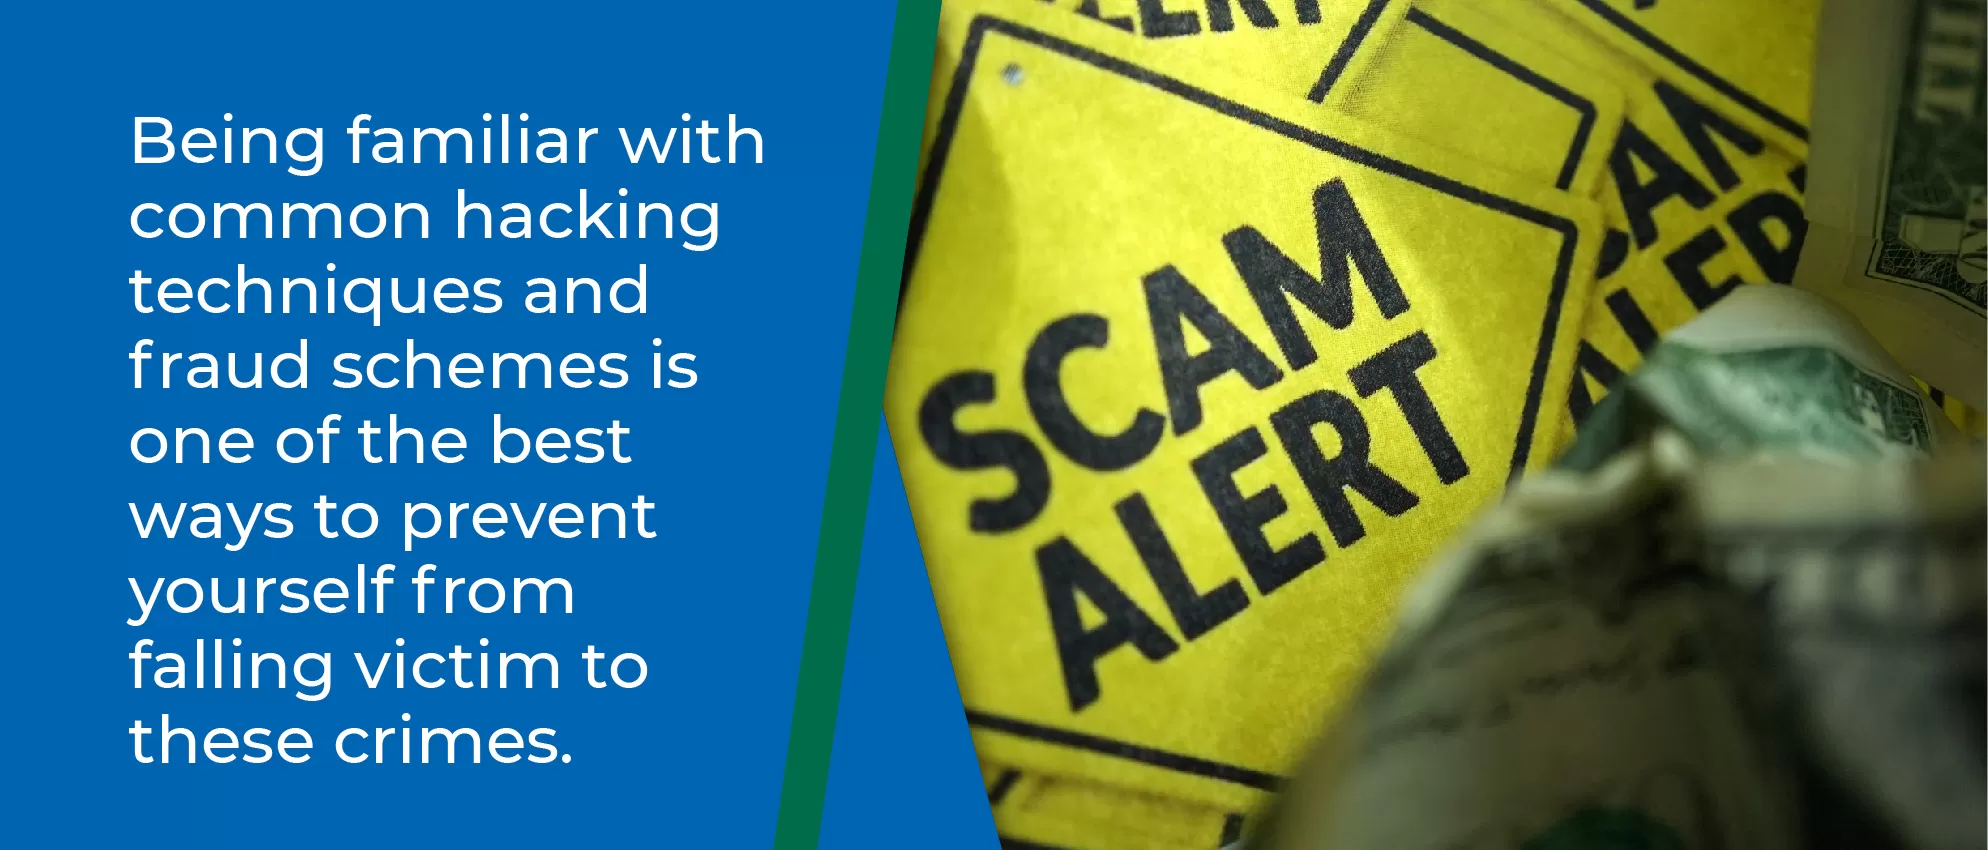 Being familiar with common hacking techniques and fraud schemes is one of the best ways to prevent yourself from falling victim to these crimes - Sign that says  Scam Alert